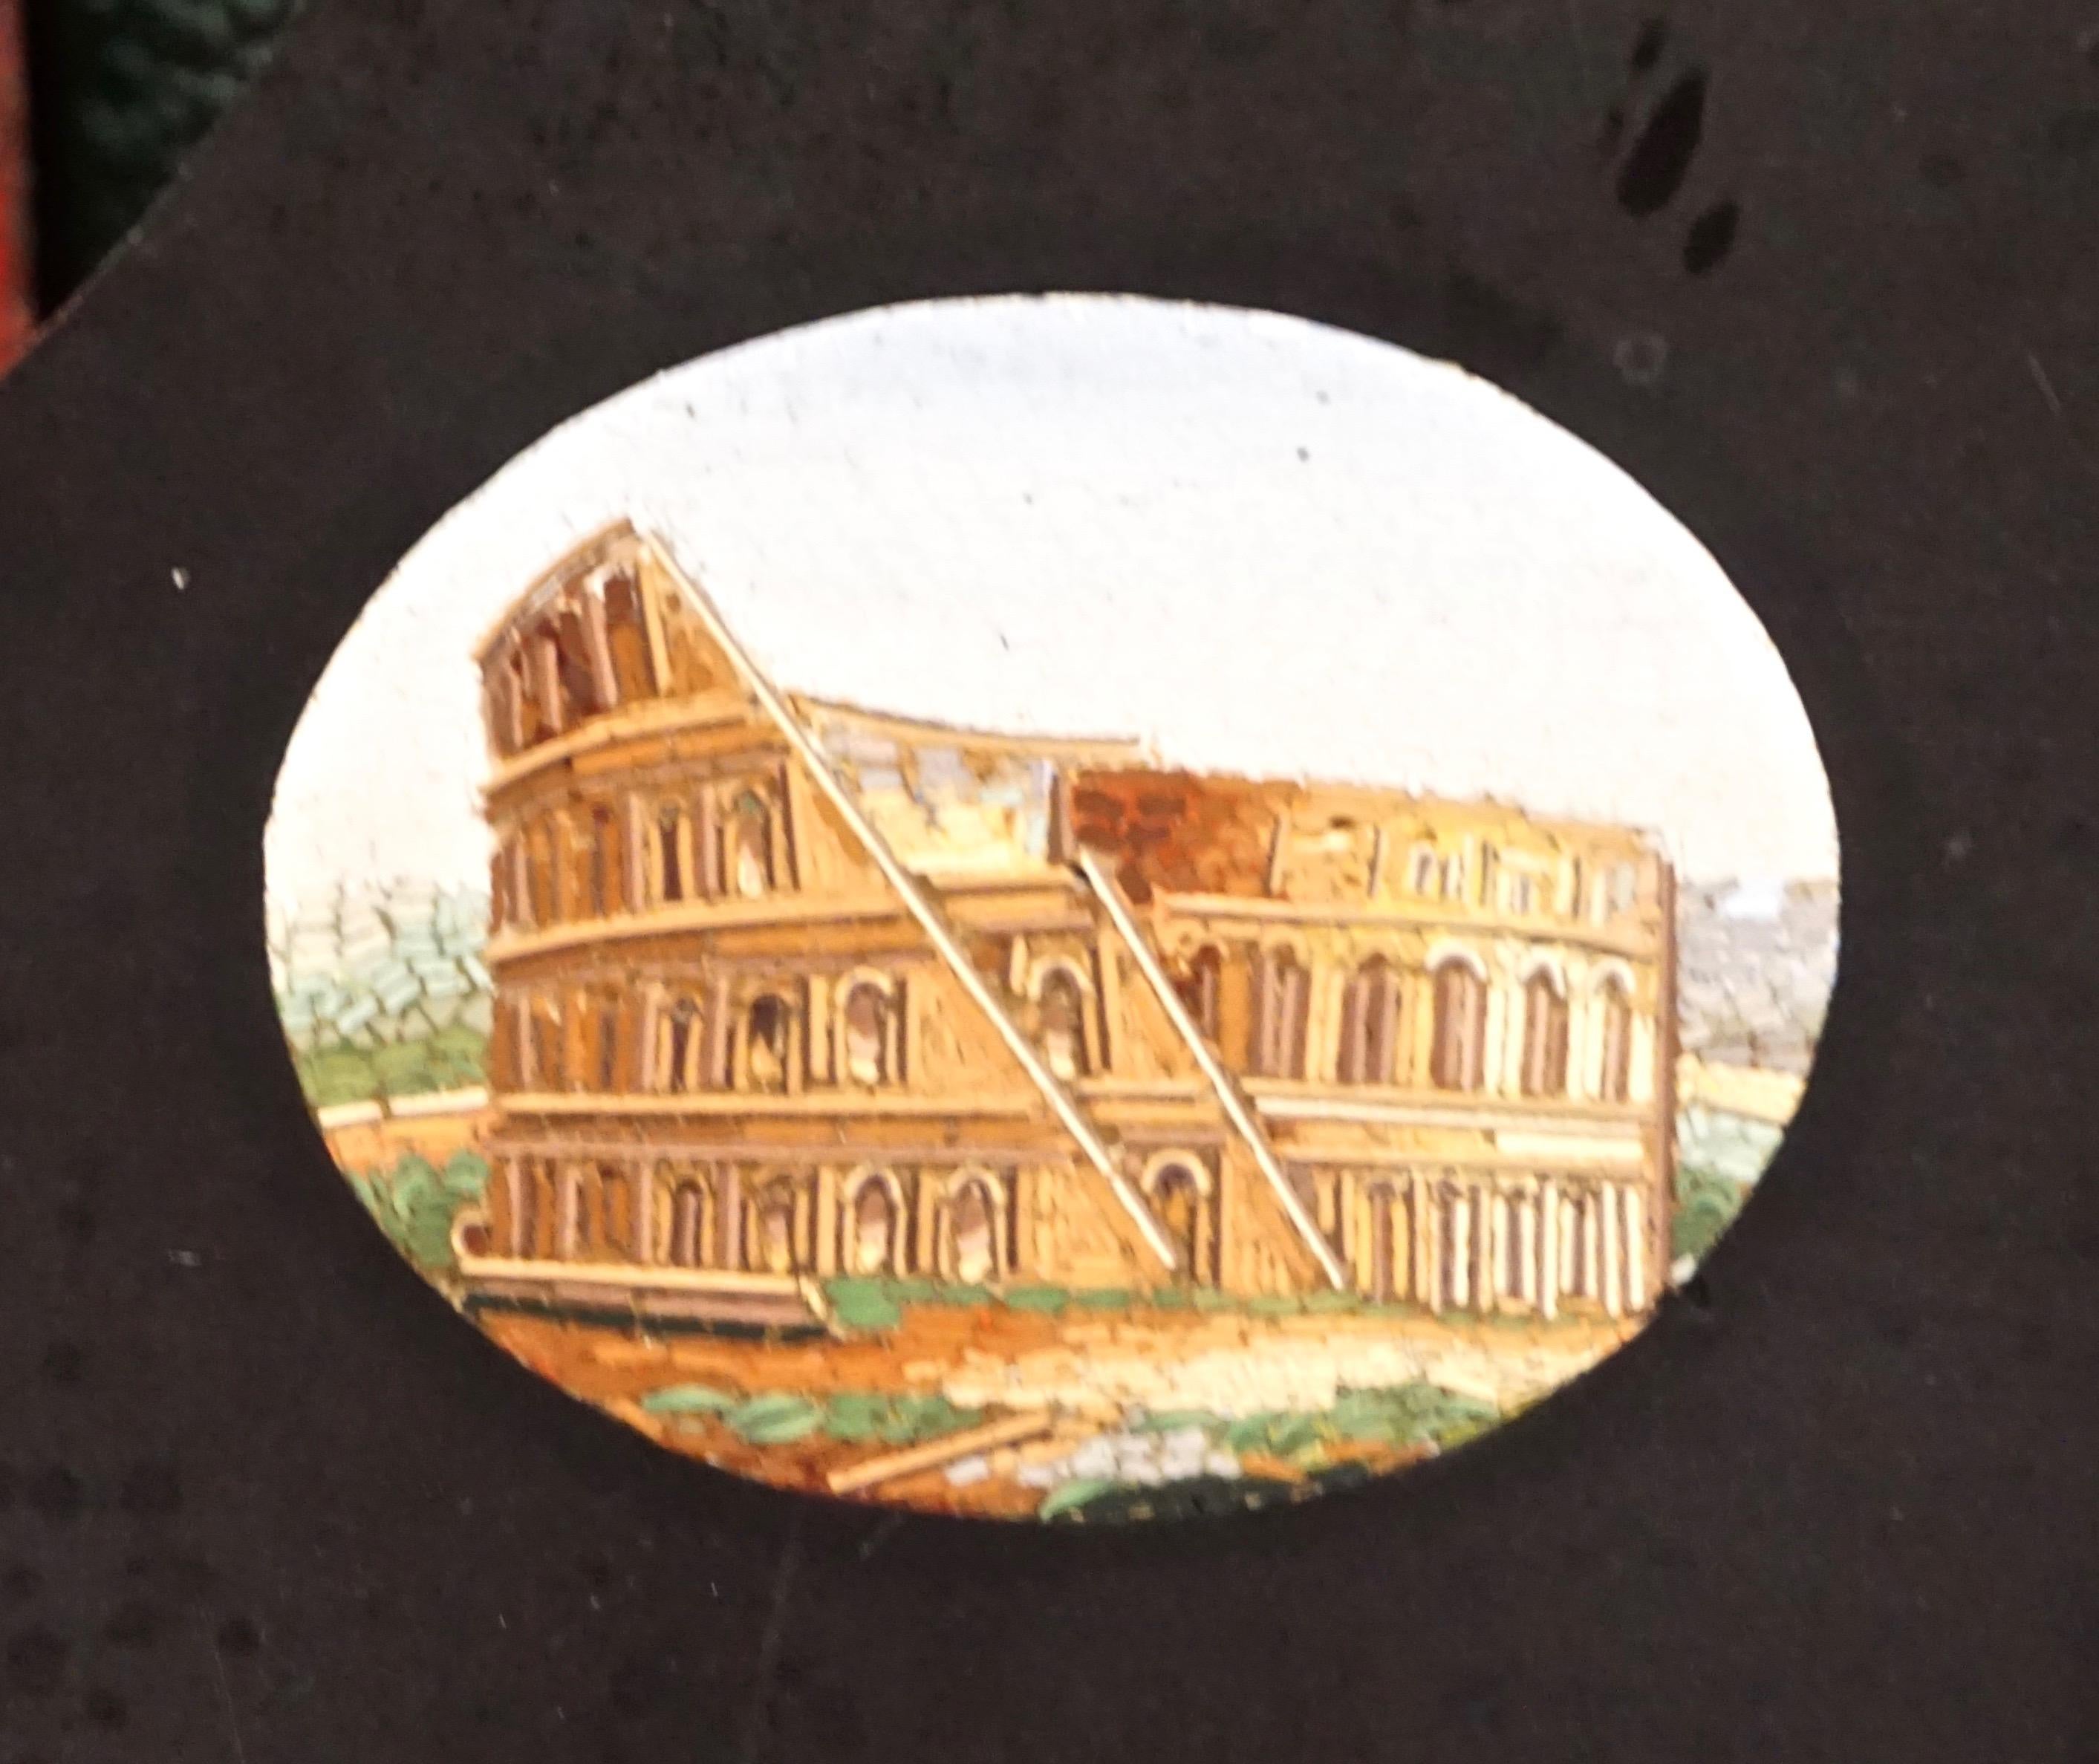 Italian Grand Tour black slate paperweight inset with 5 micro mosaic depictions of ancient Roman monuments. The central medallion of St. Peter's Square is surrounded by the Colosseum, Pantheon, Forum and Temple of Vesta, all intricately crafted of 